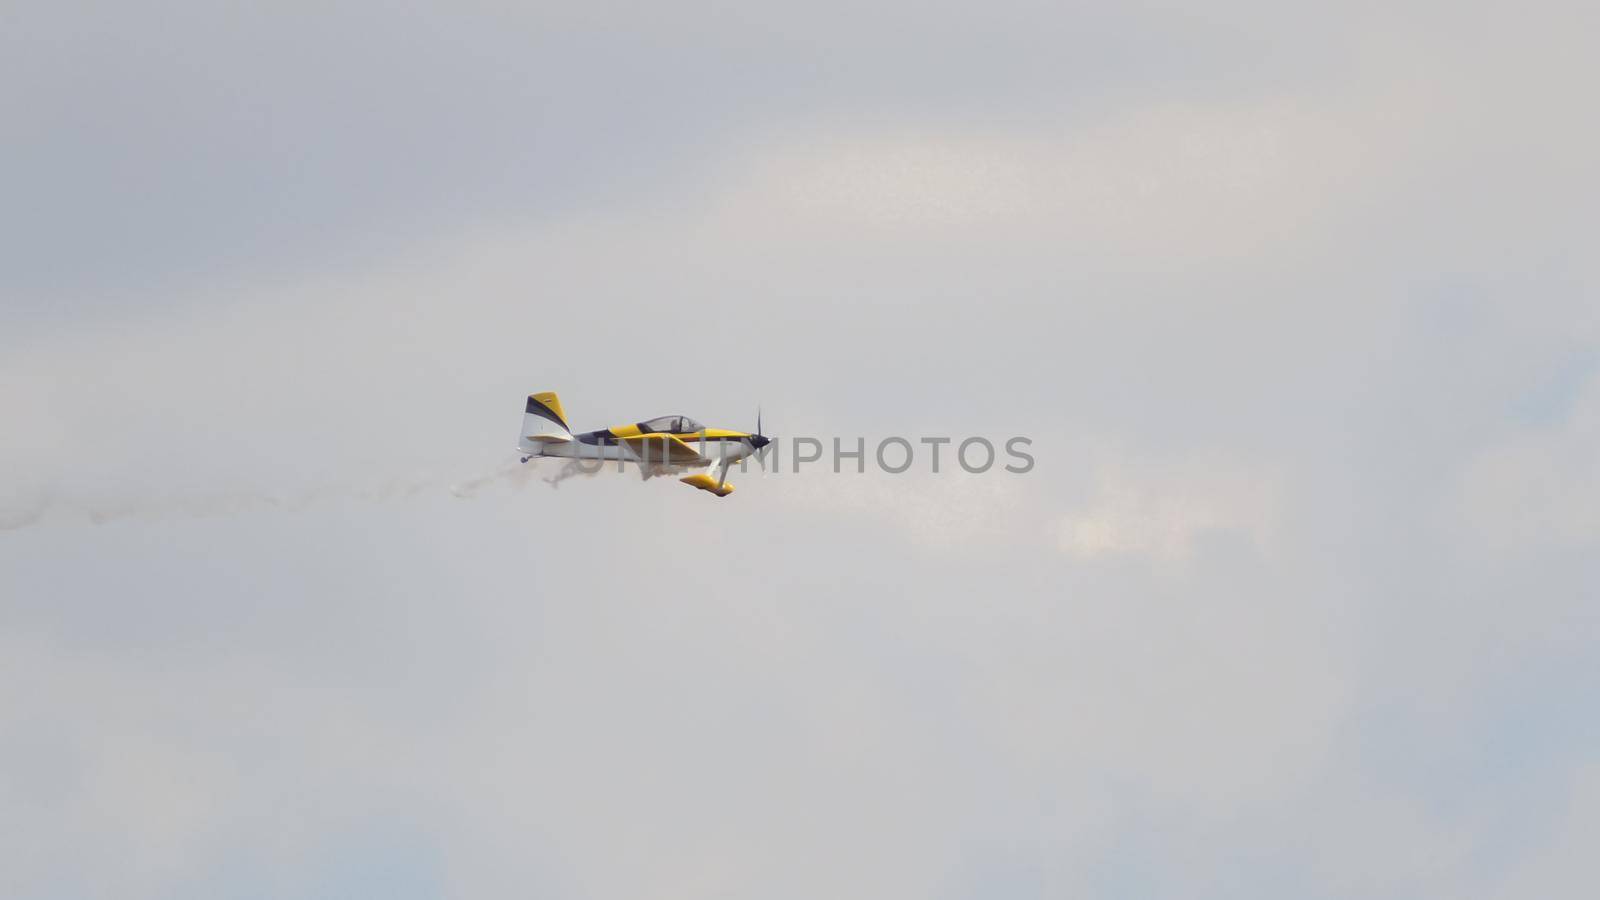 Small yellow Airplane flying in an extreme acrobatics exhibition by Studia72